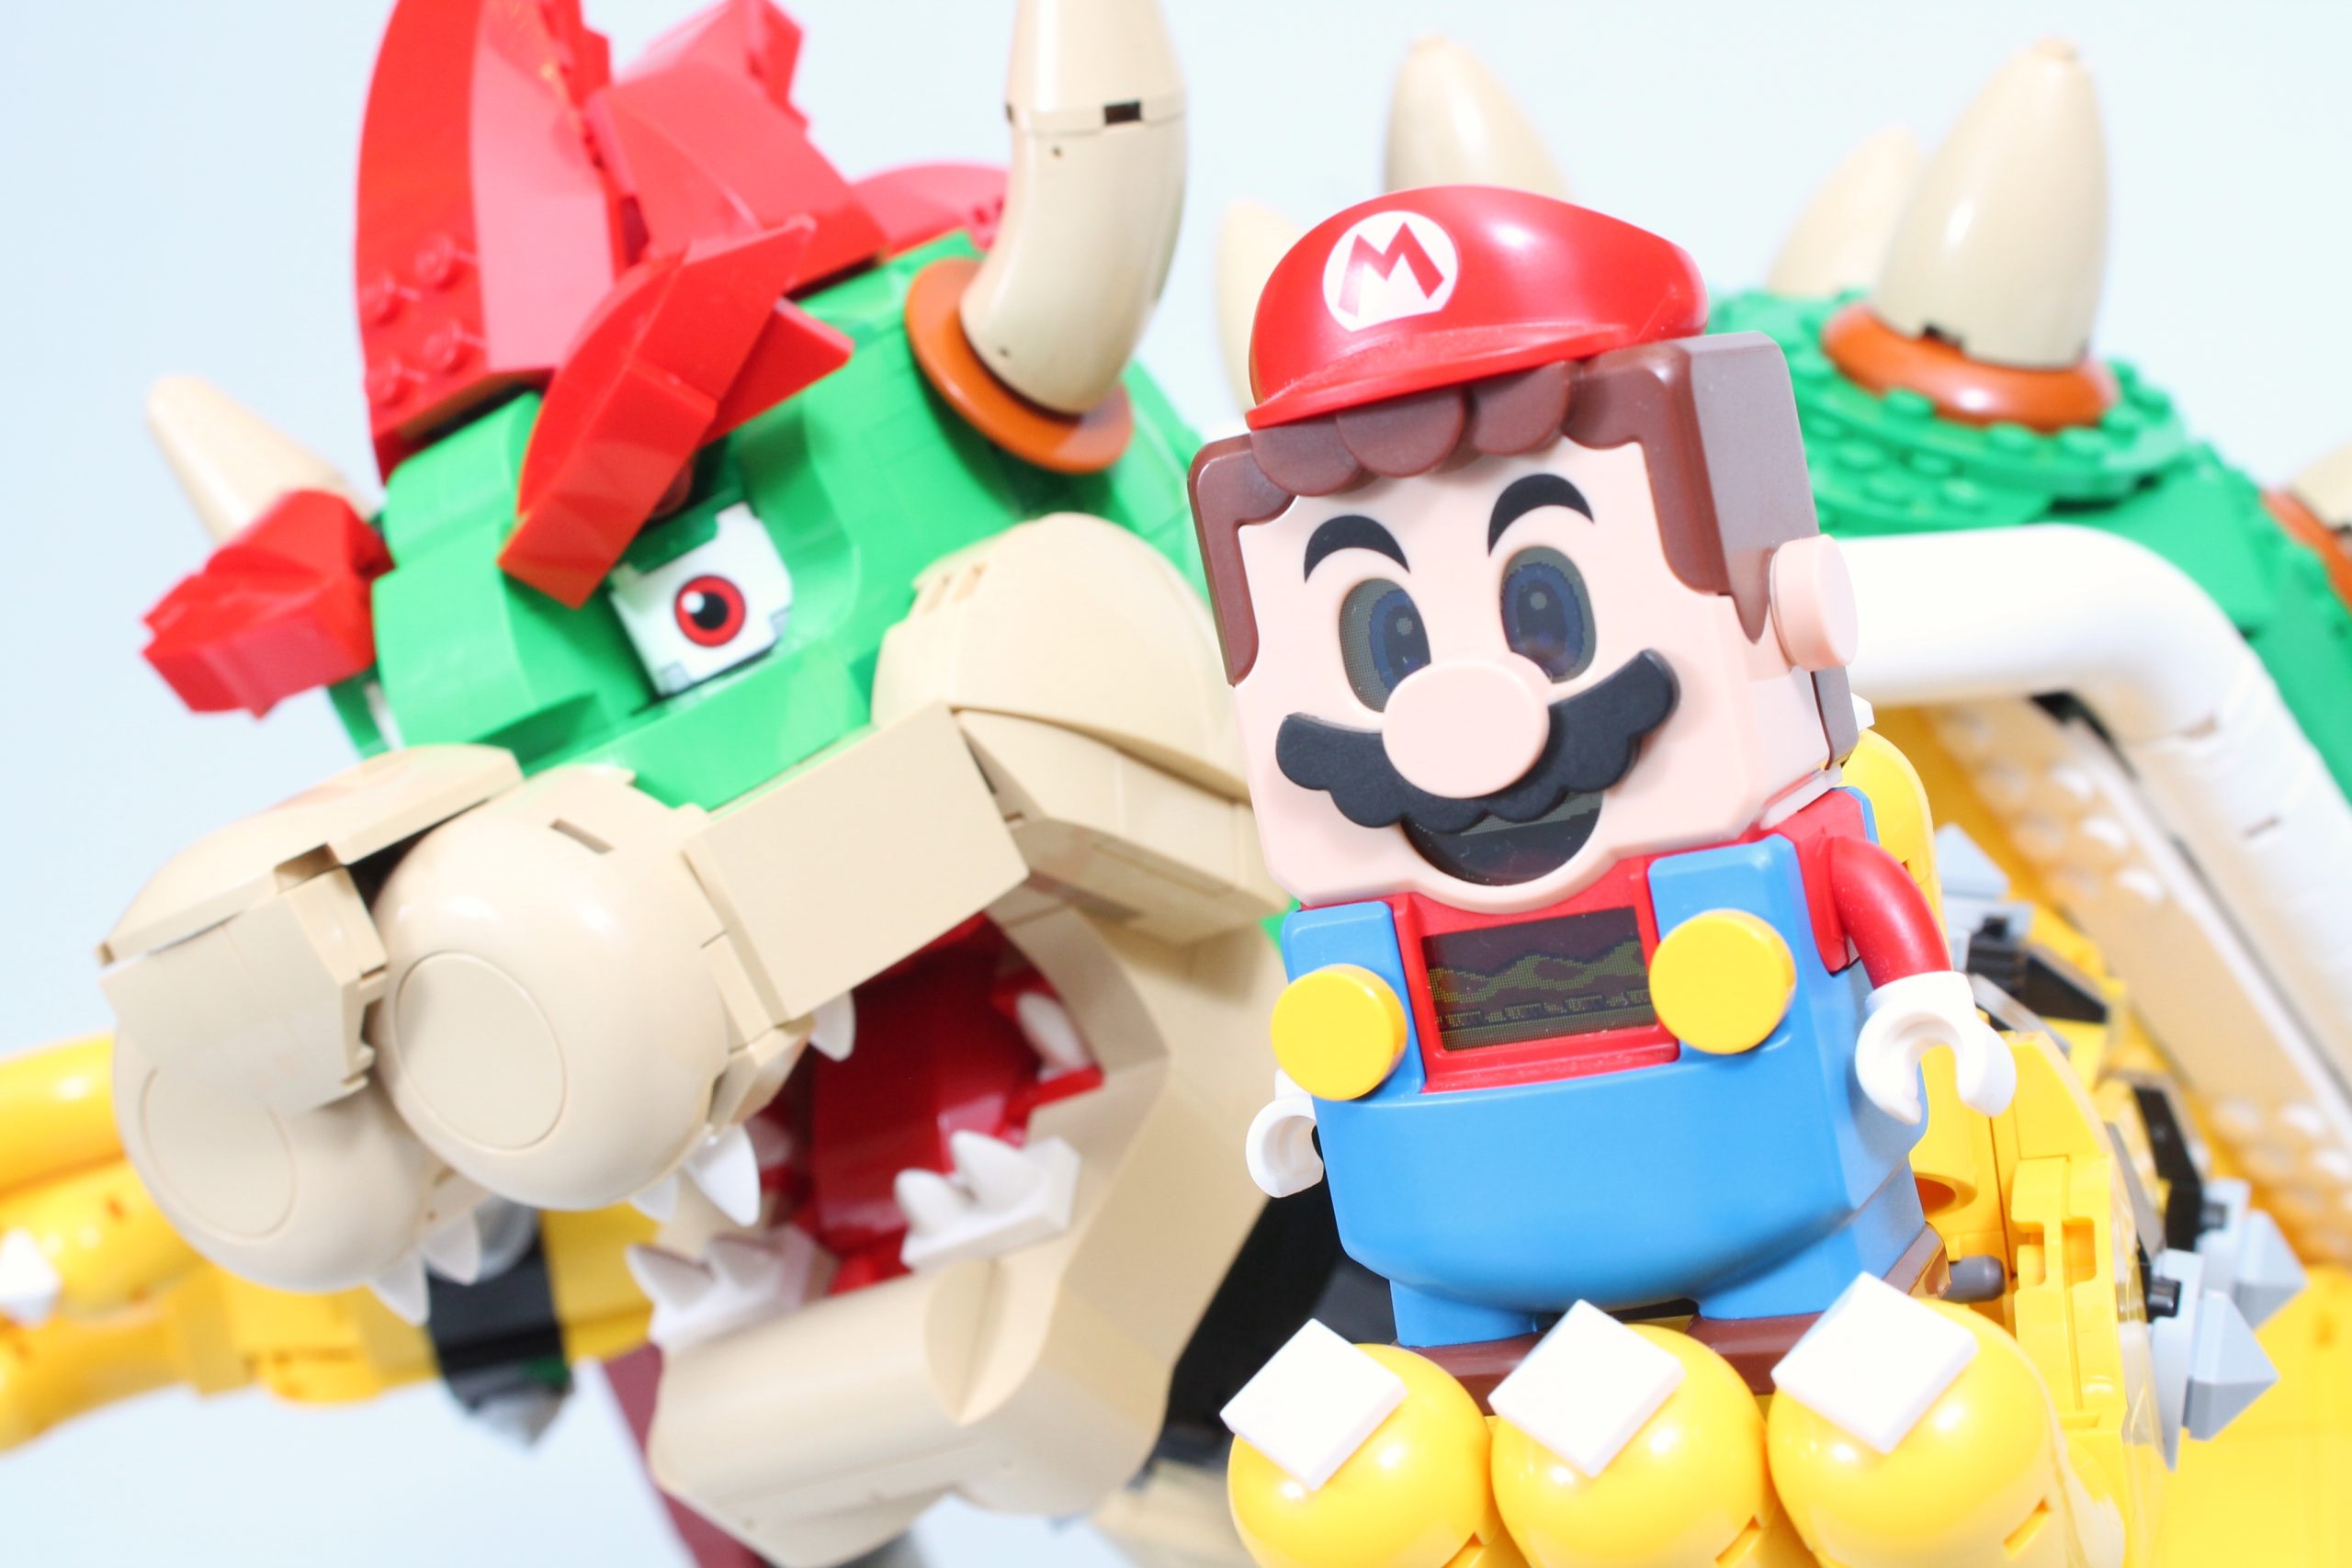 Lego Super Mario 71411 The Mighty Bowser Speed Build 